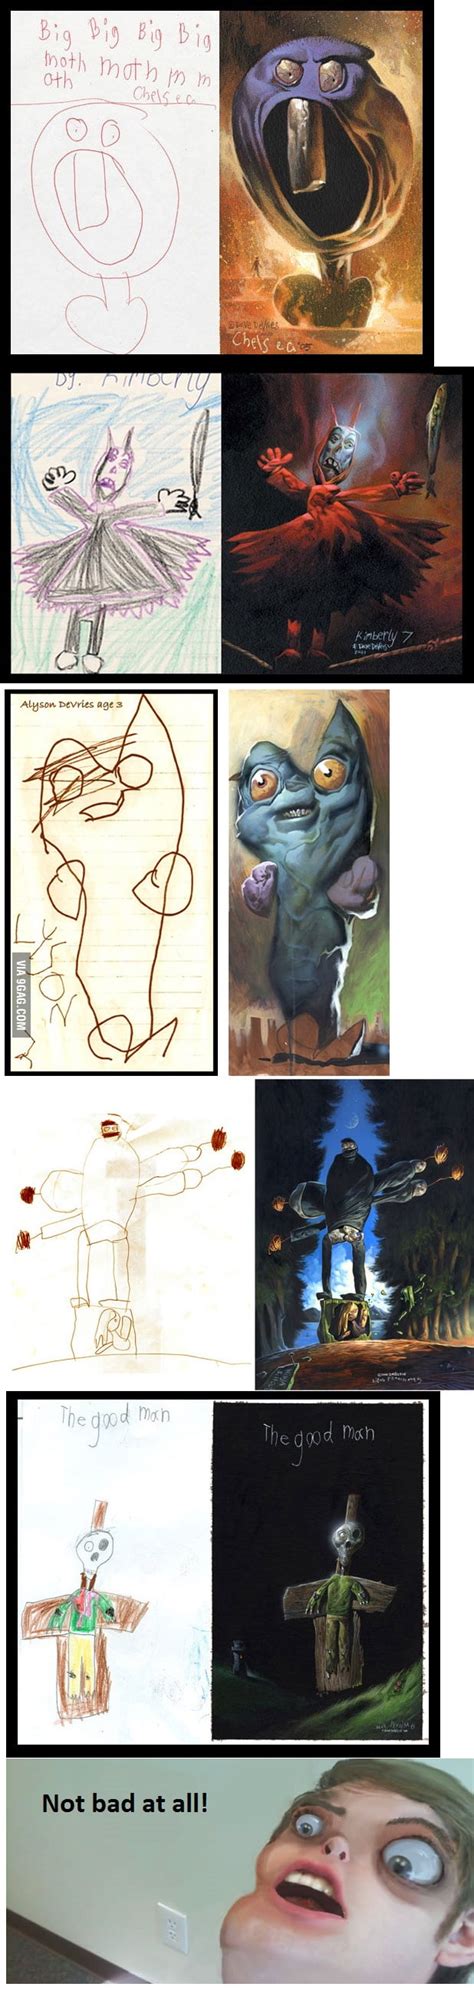 How to draw the new retro characters of tod. What is children's drawings looked realistic? - 9GAG